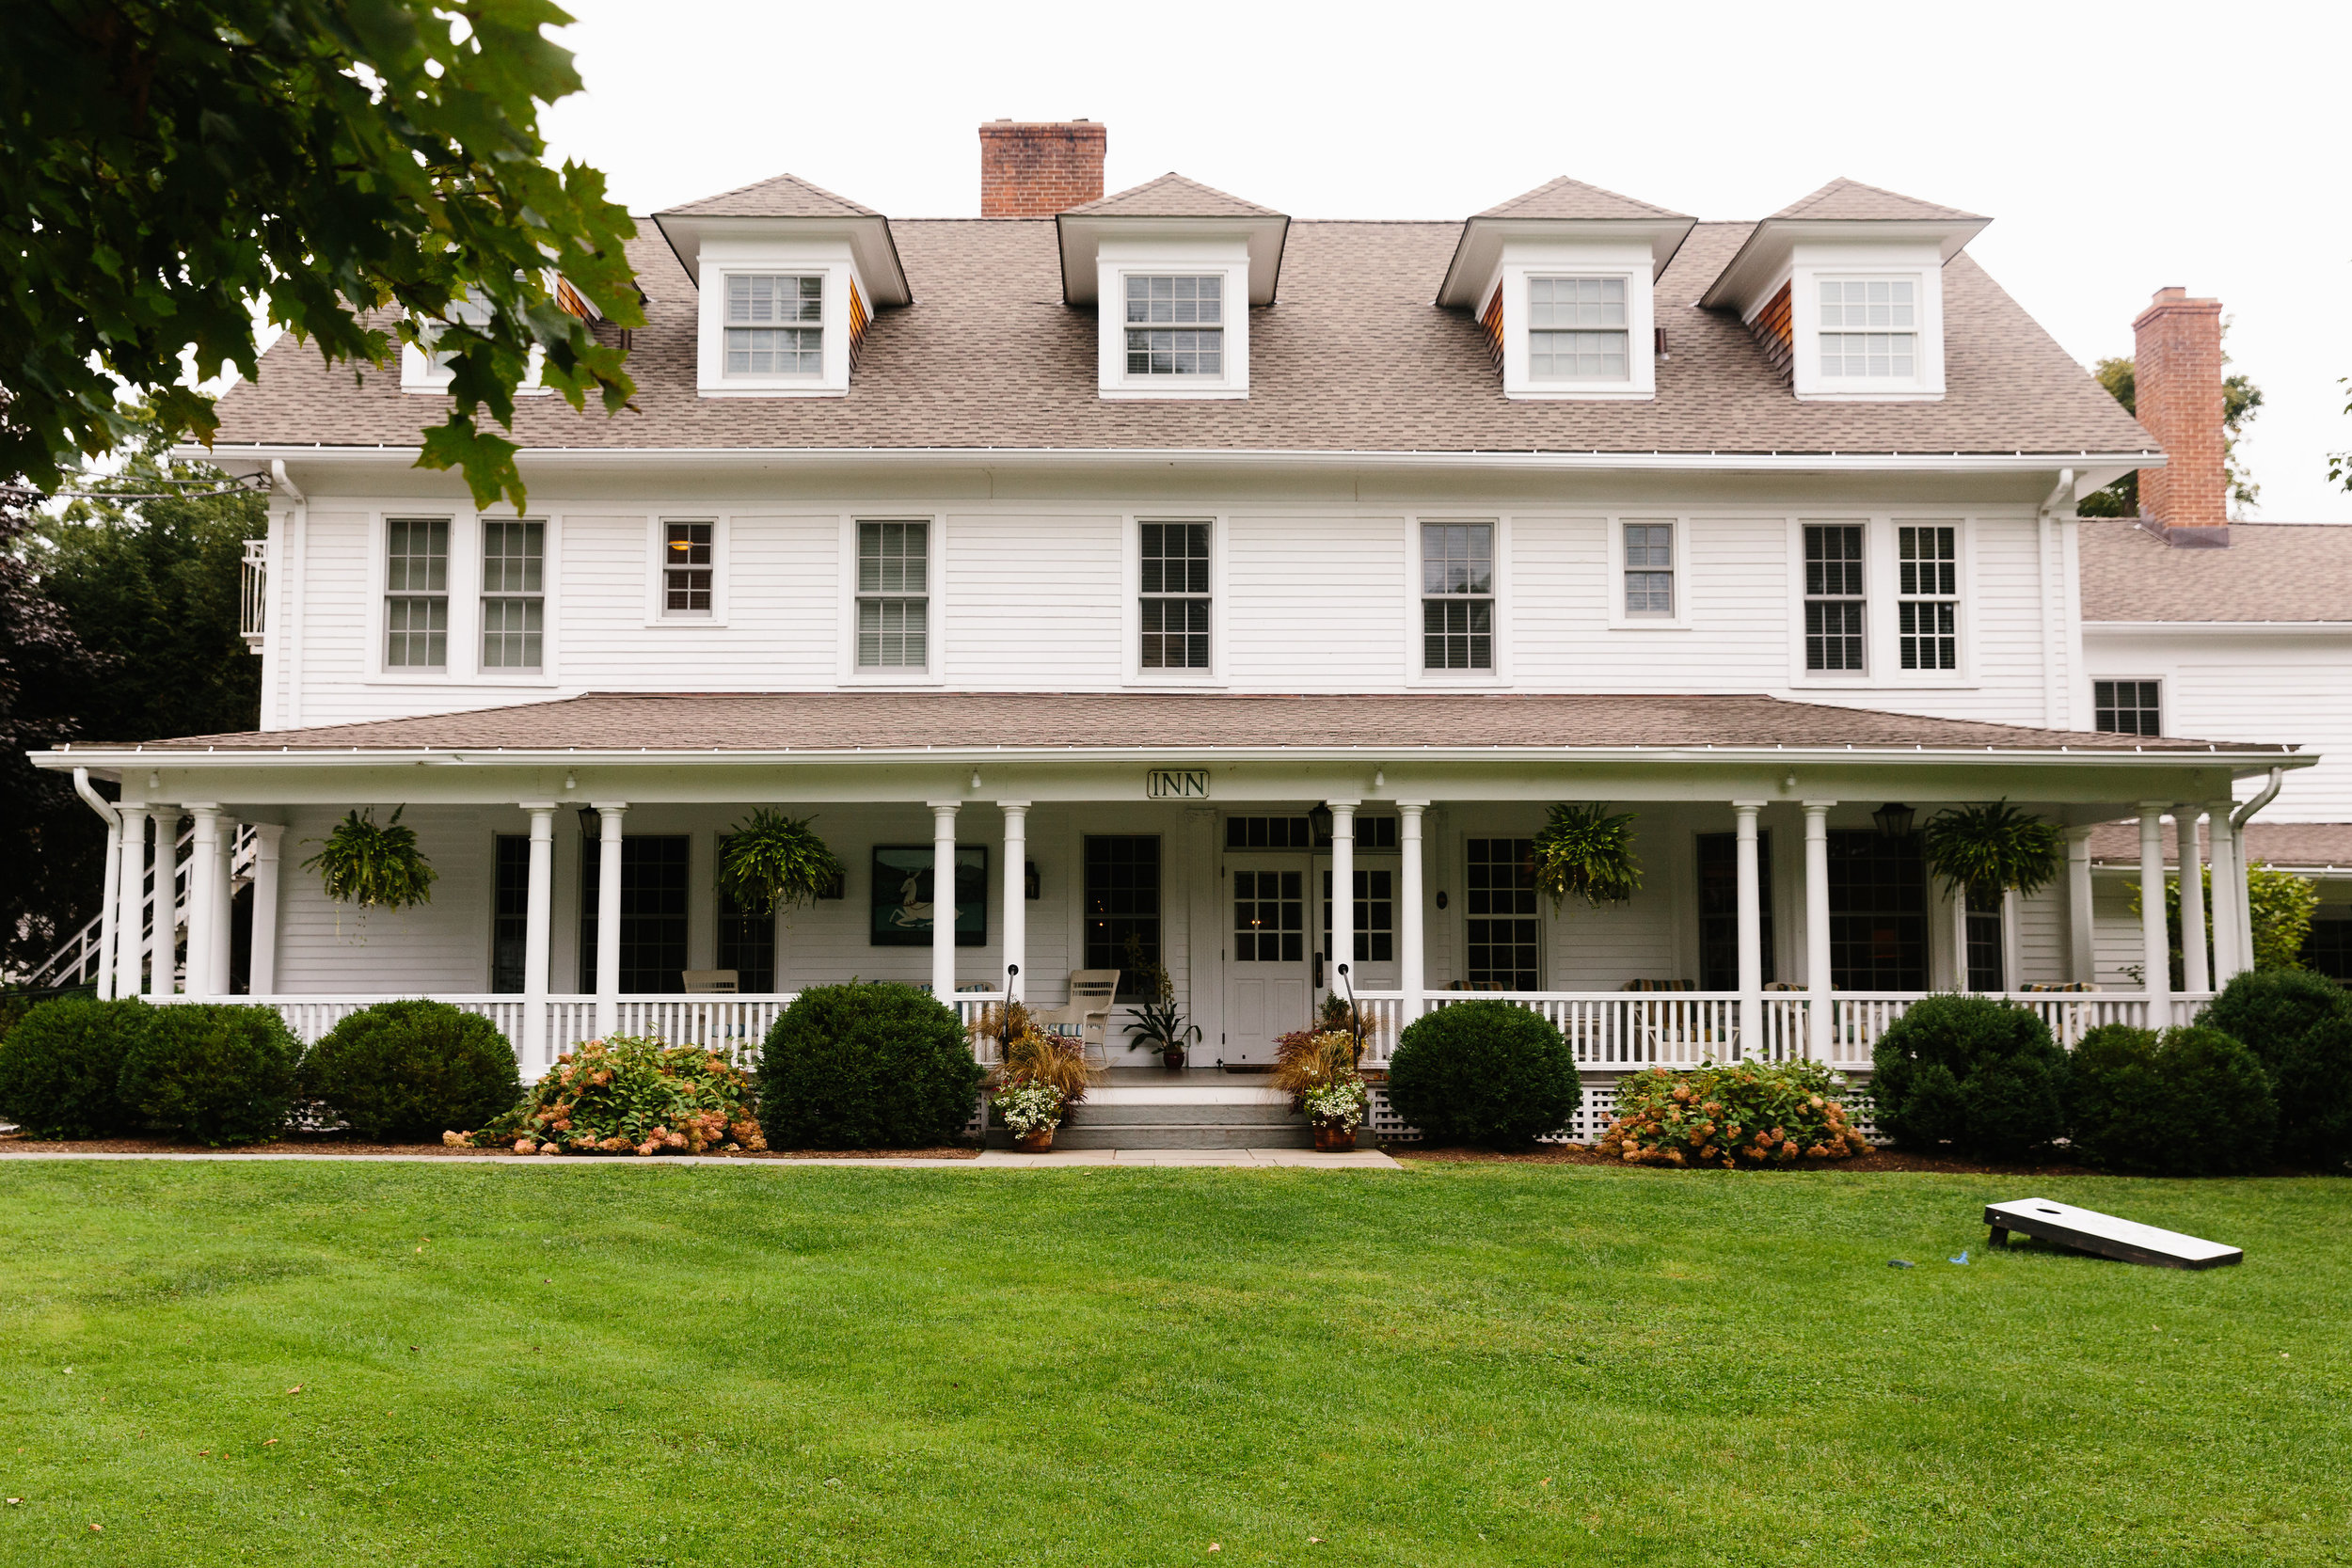 Where to Stay In Litchfield County The White Hart Inn.jpg